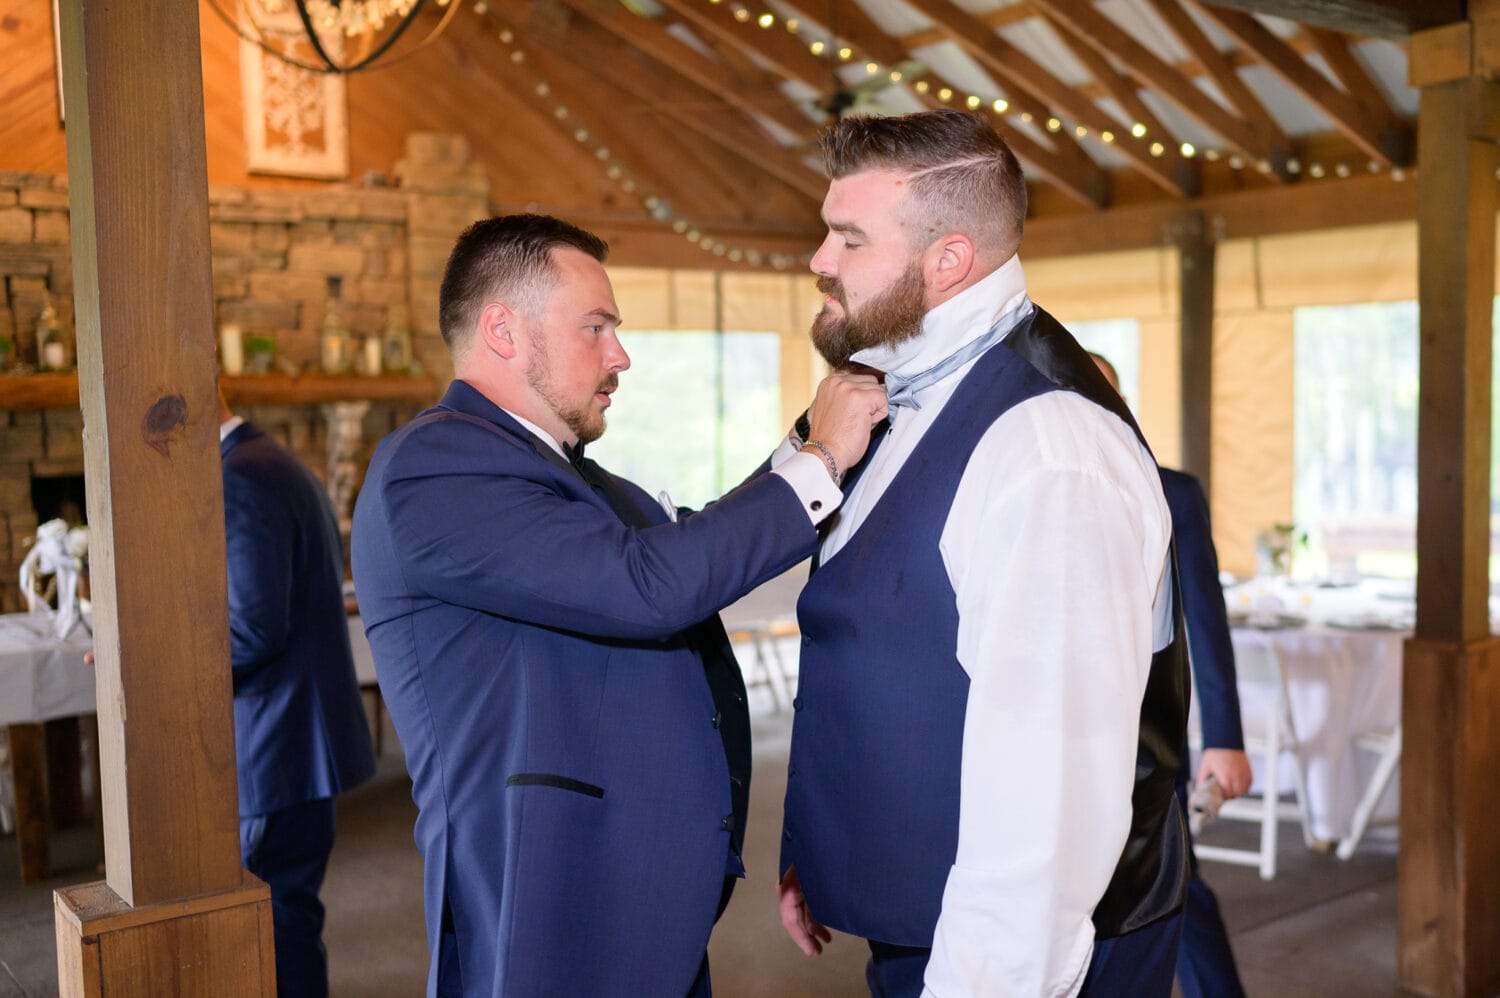 Groom helping best man with his tie - Wildhorse at Parker Farms